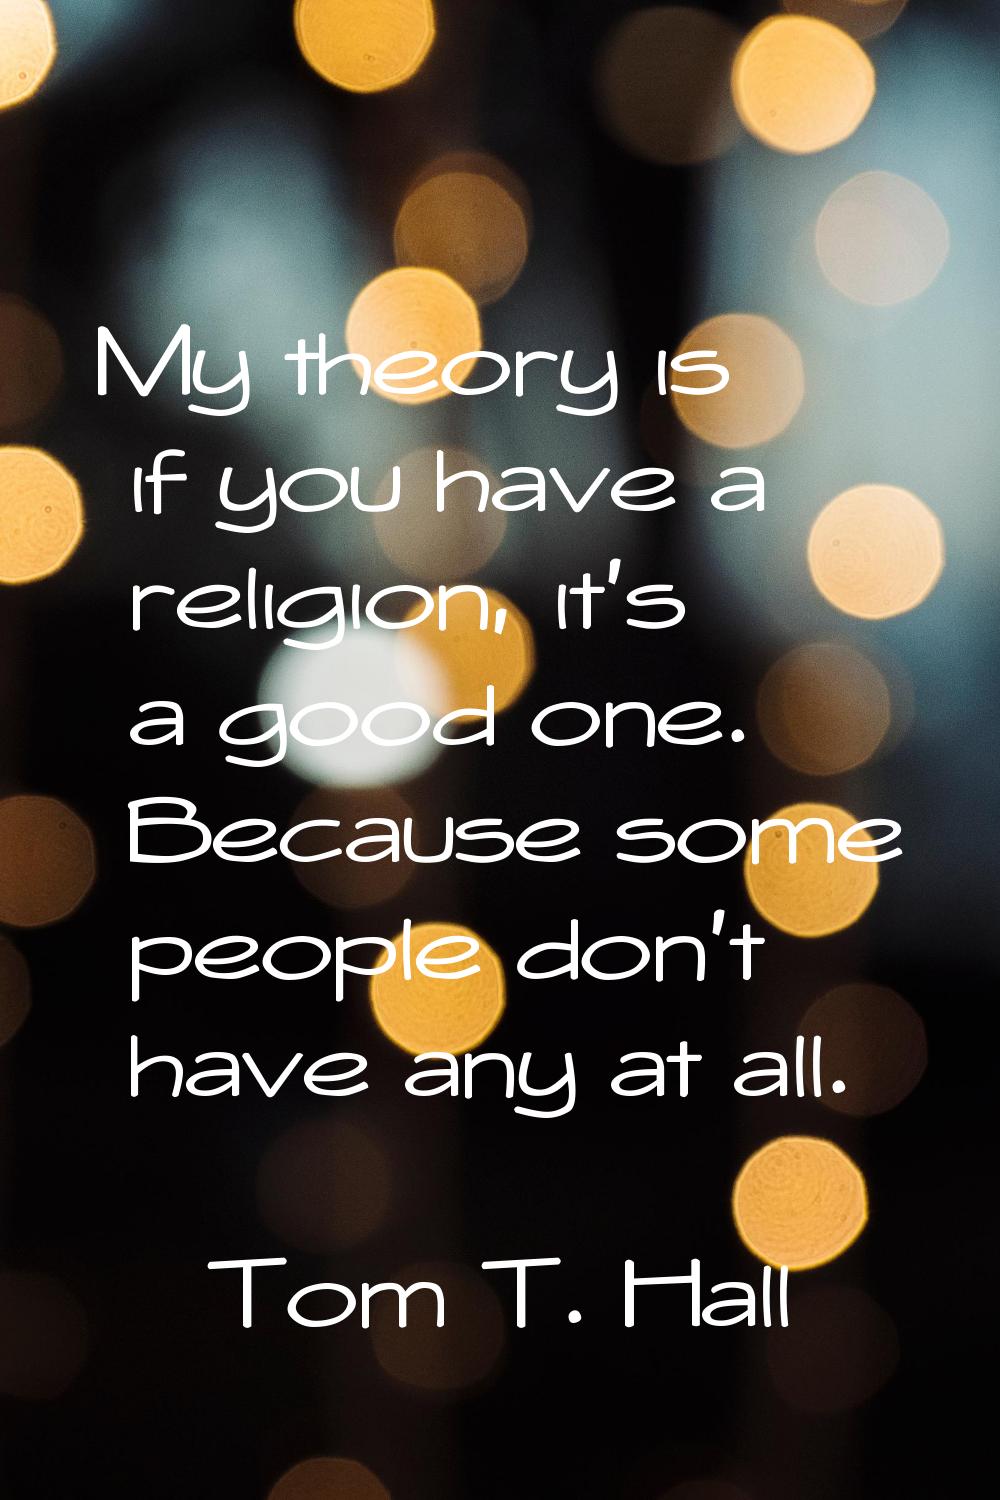 My theory is if you have a religion, it's a good one. Because some people don't have any at all.